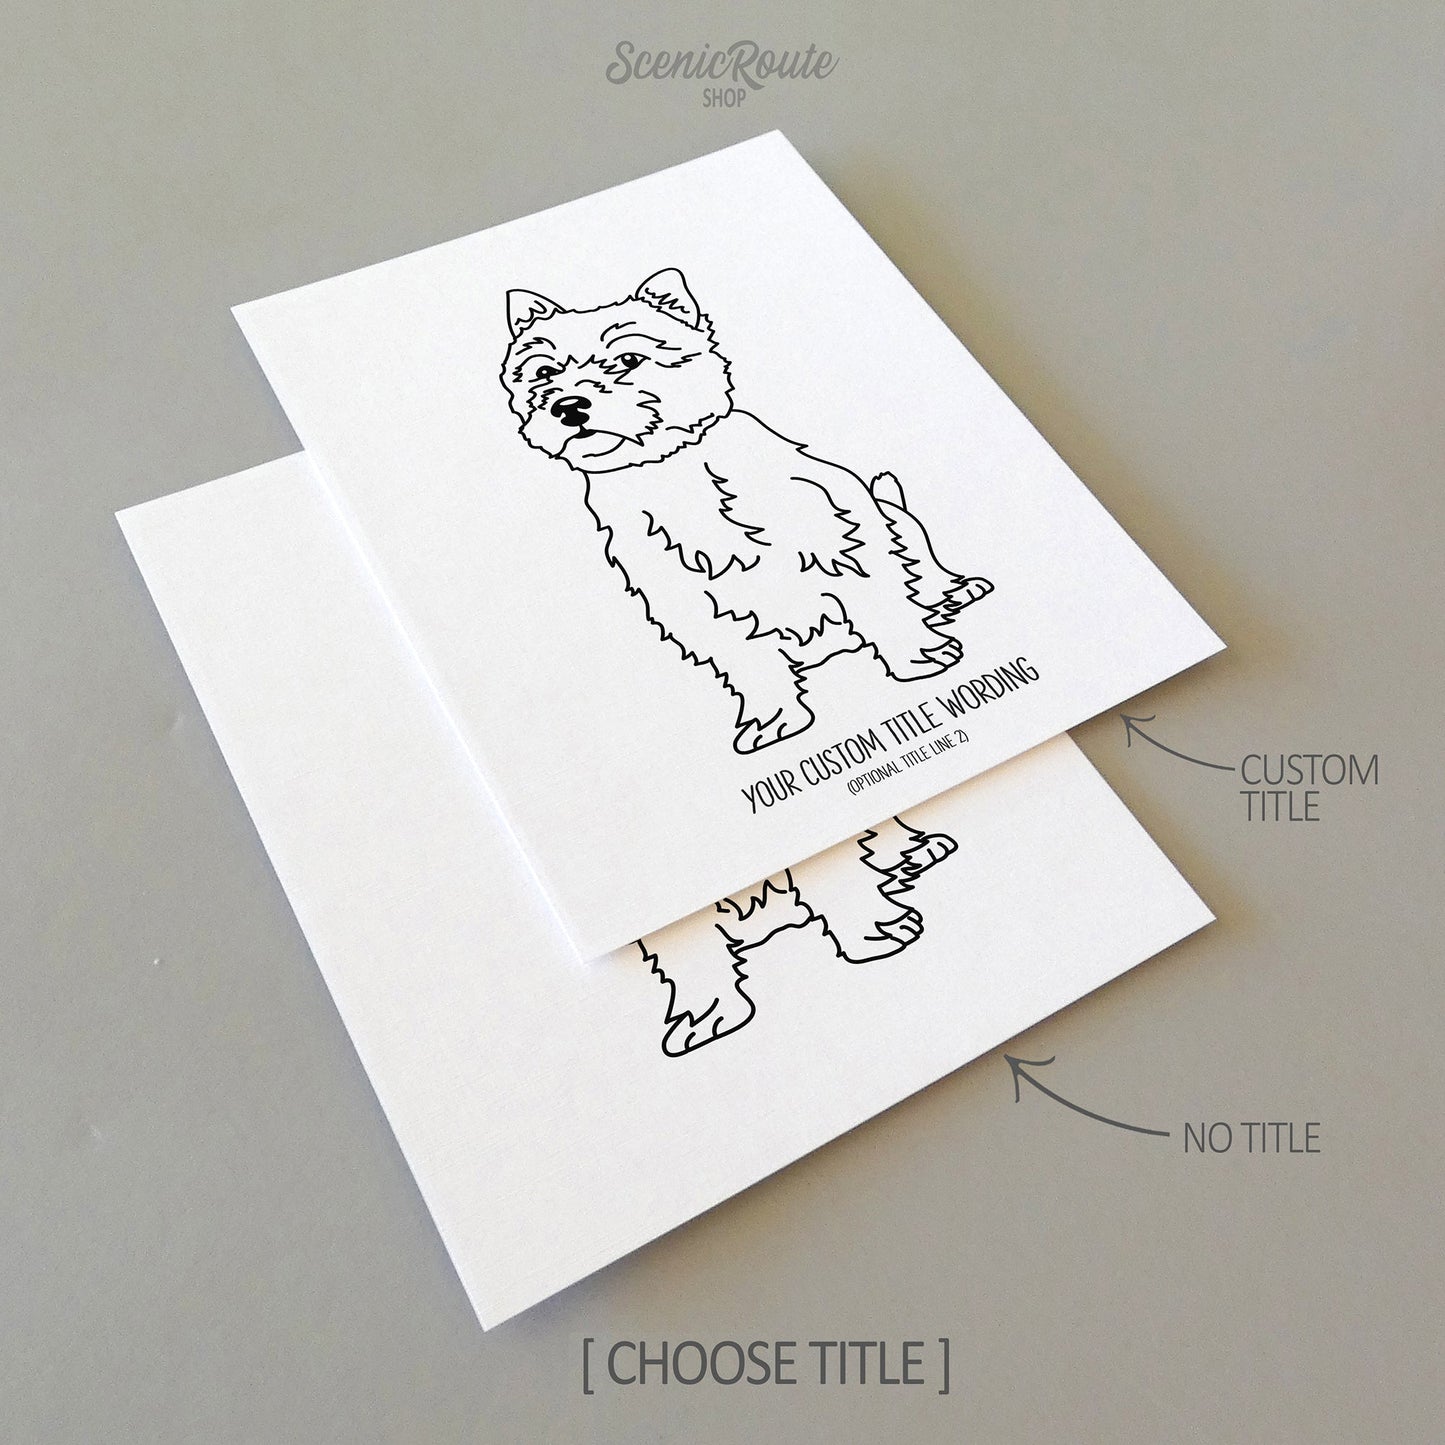 Two line art drawings of a Norwich Terrier dog on white linen paper with a gray background.  The pieces are shown with “No Title” and “Custom Title” options for the available art print options.